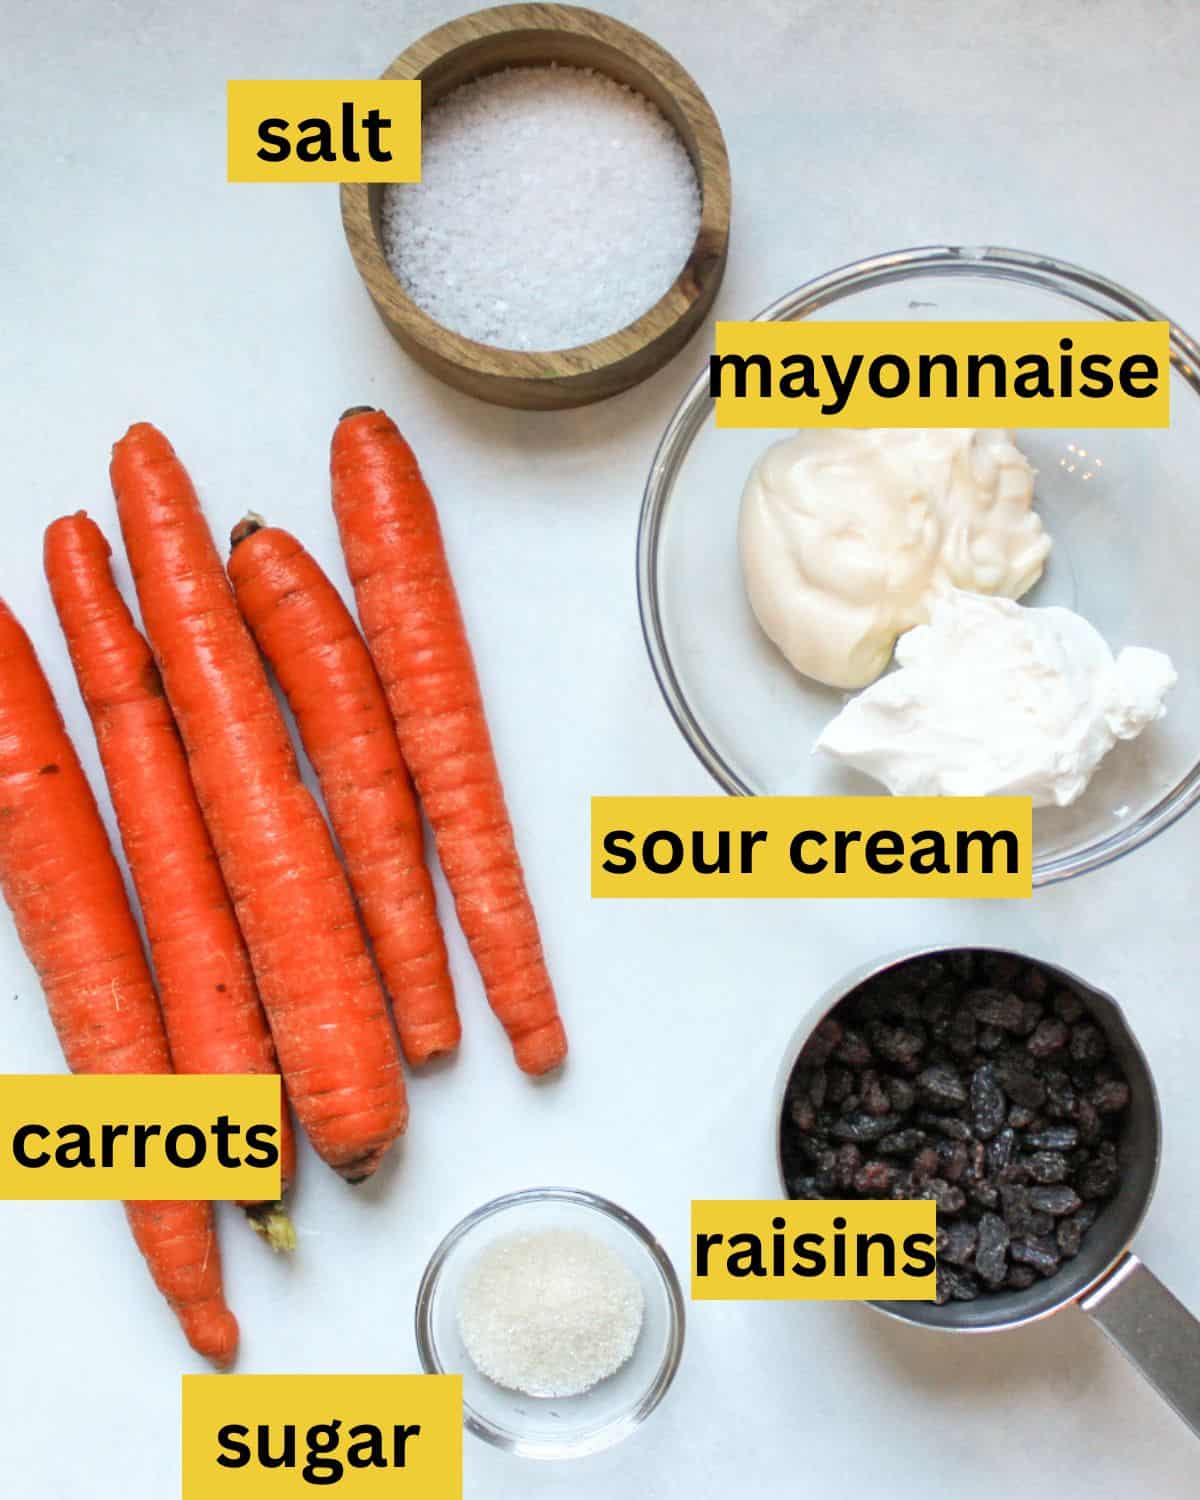 All the recipe ingredients neatly arranged on a white background, each labeled as carrots, salt, mayonnaise, sour cream, sugar, raisins.